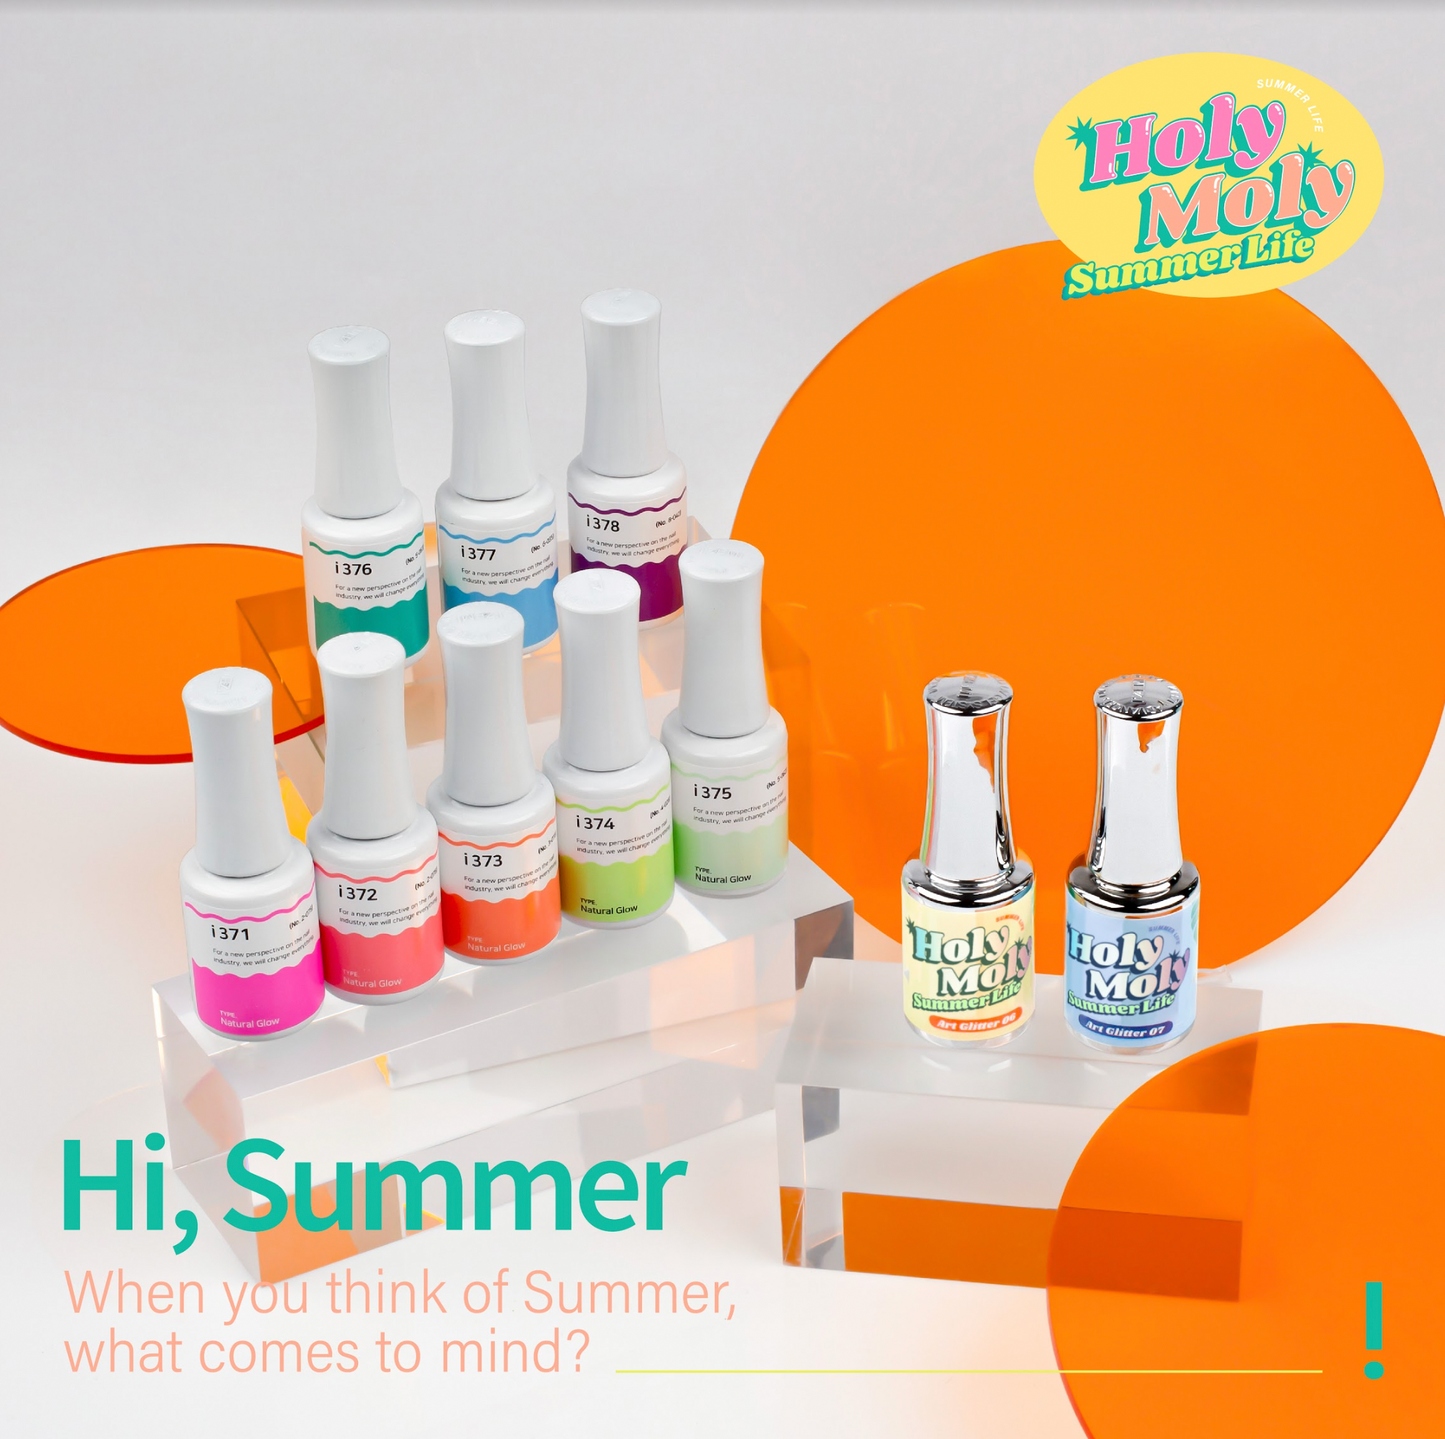 Holy Moly Summer Life 10pc collection - limited edition packaging